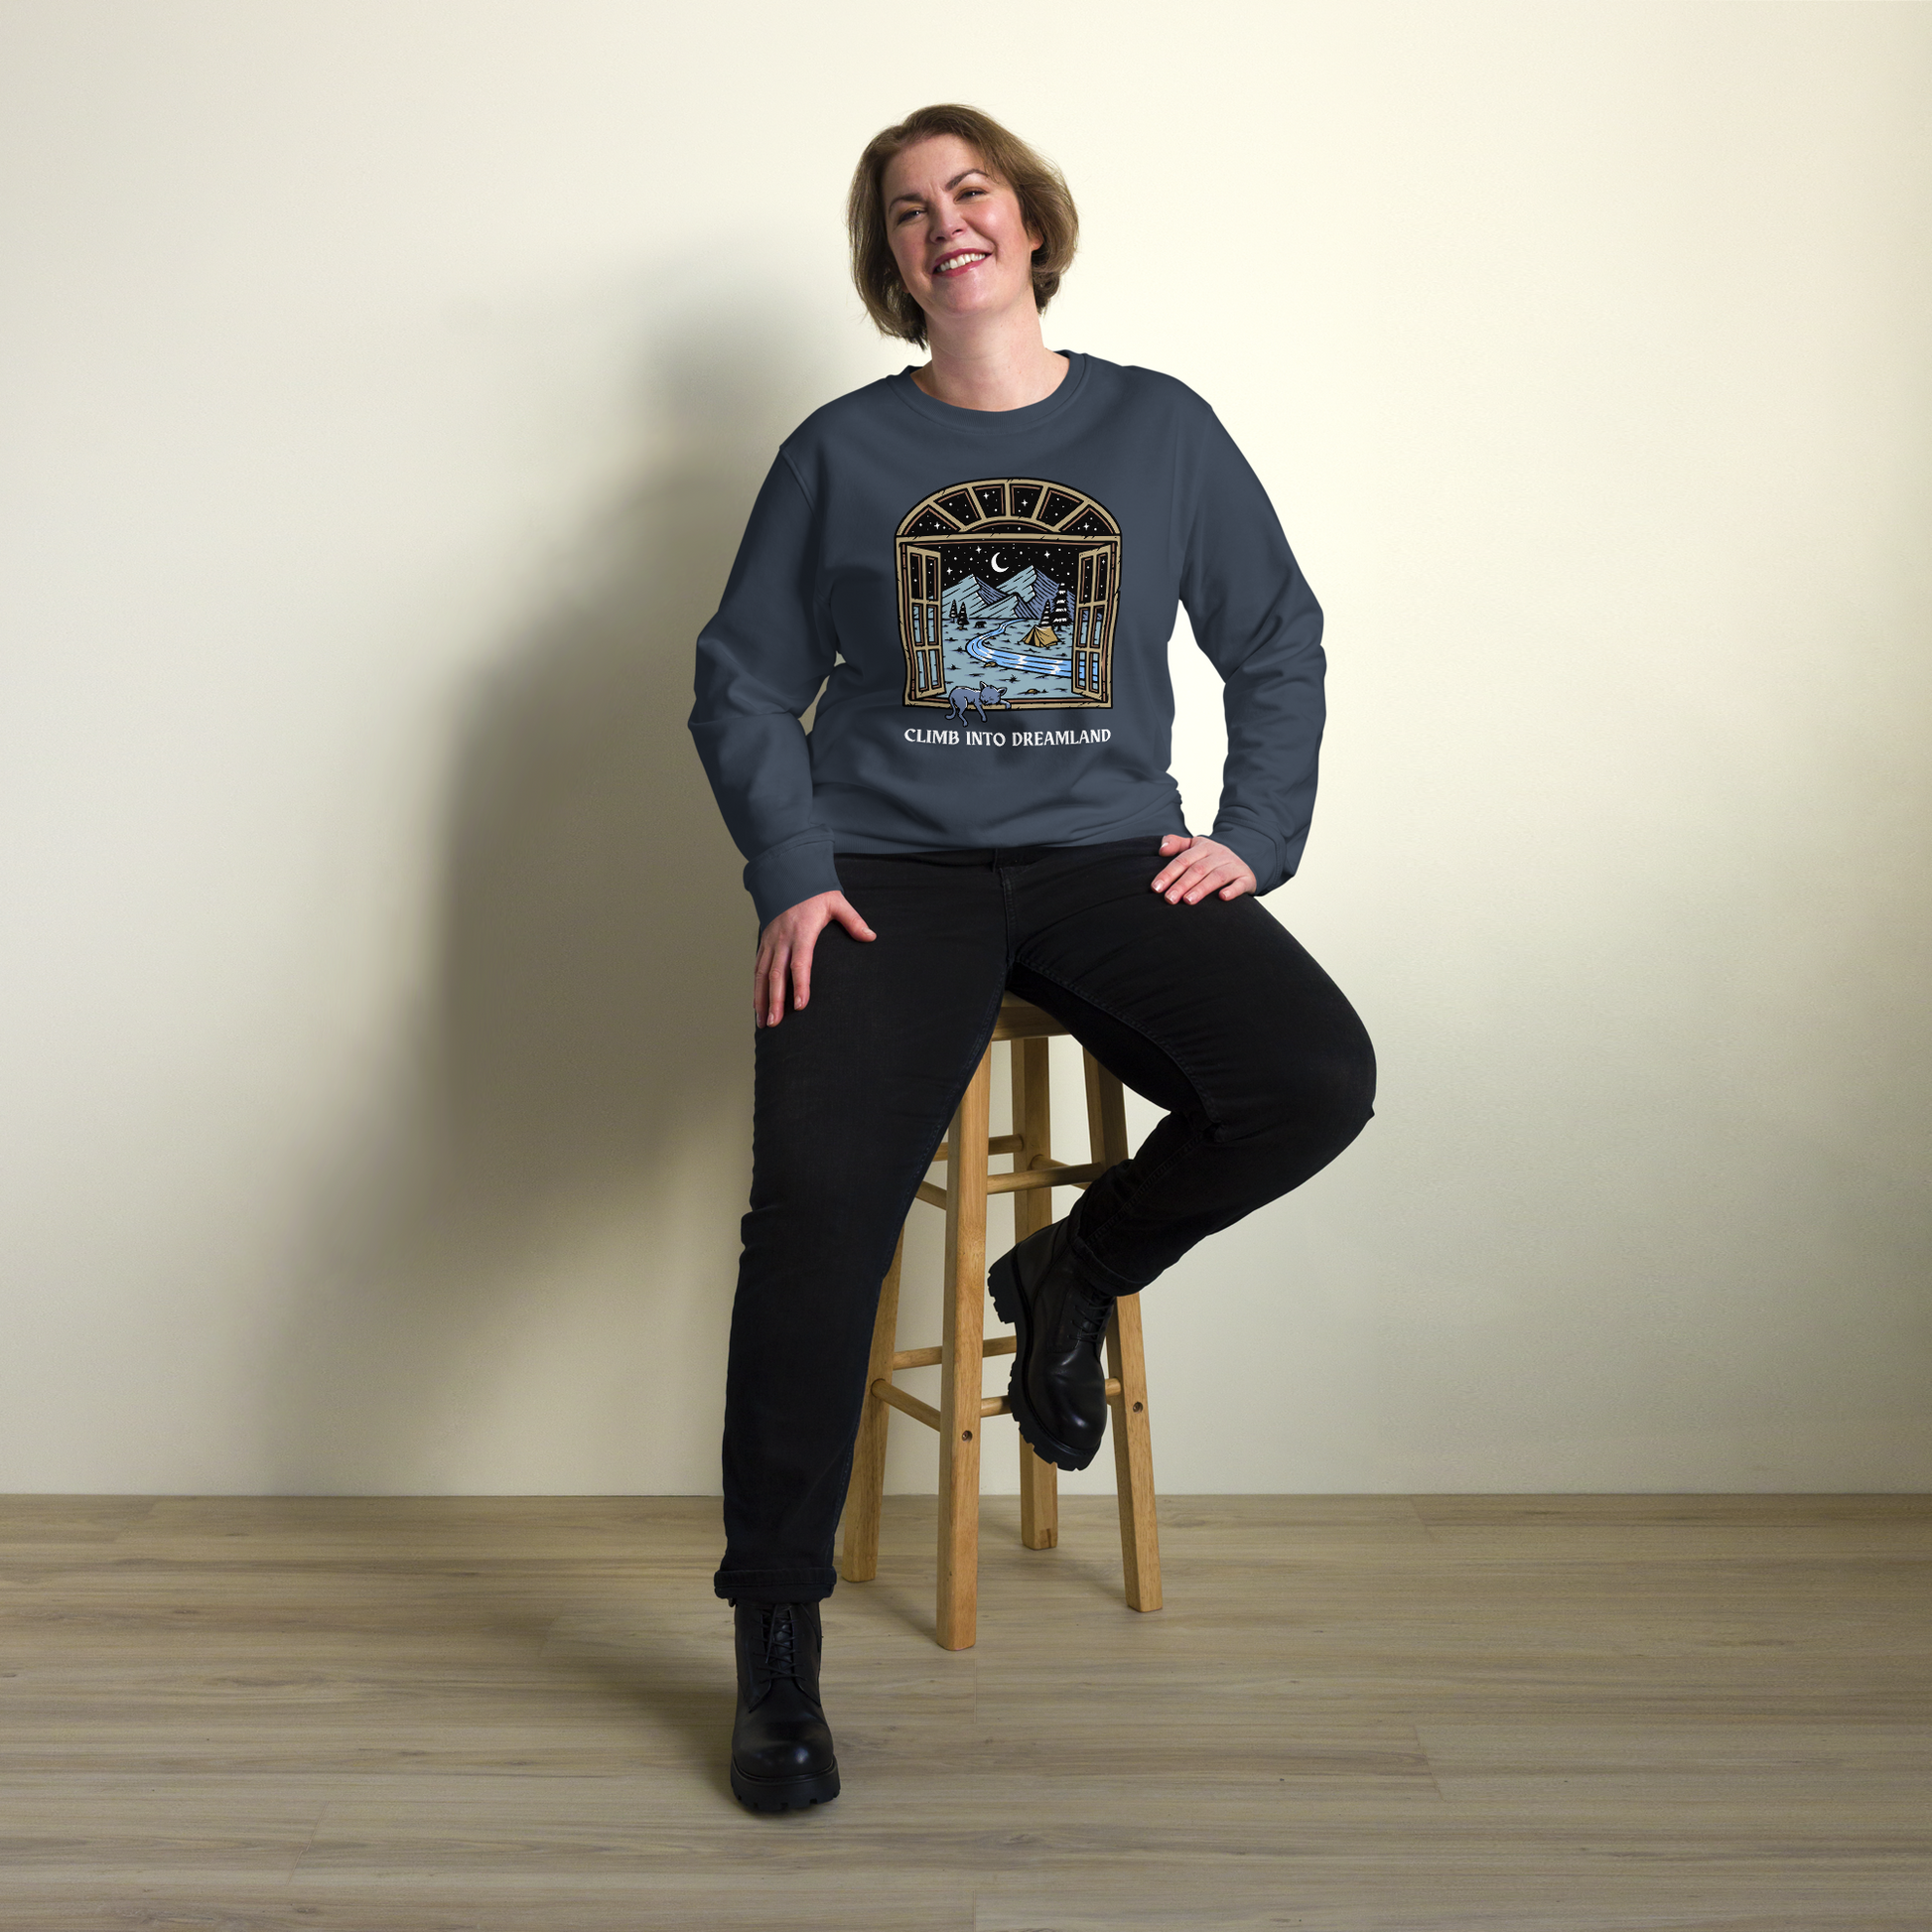 Smiling woman wearing a French Navy Organic Cotton Climb Into Dreamland Sweatshirt featuring a mesmerizing mountain view graphic on the chest - Cool Graphic Nature Sweatshirts - Boozy Fox